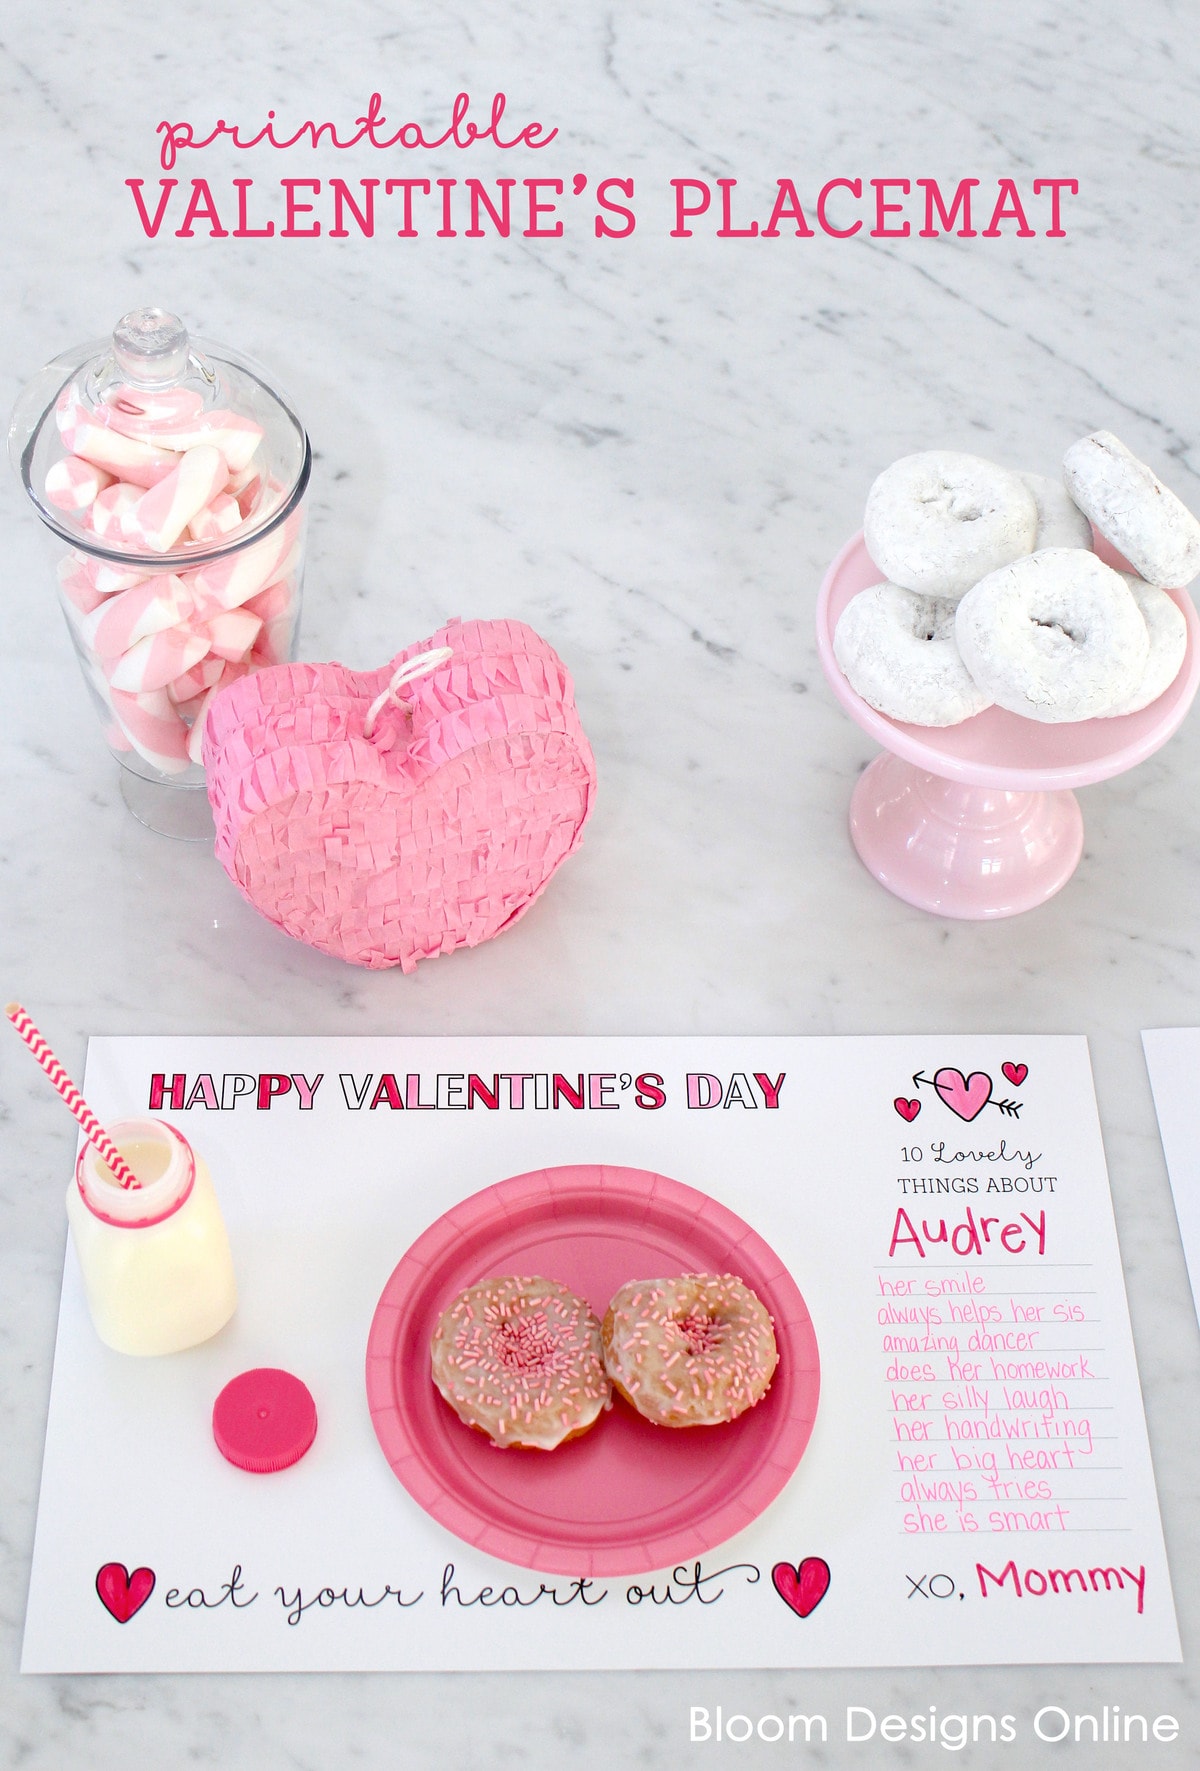 FREE Printable Valentine's Day Placemats - such a cute idea to use for parties or for February 14th!!